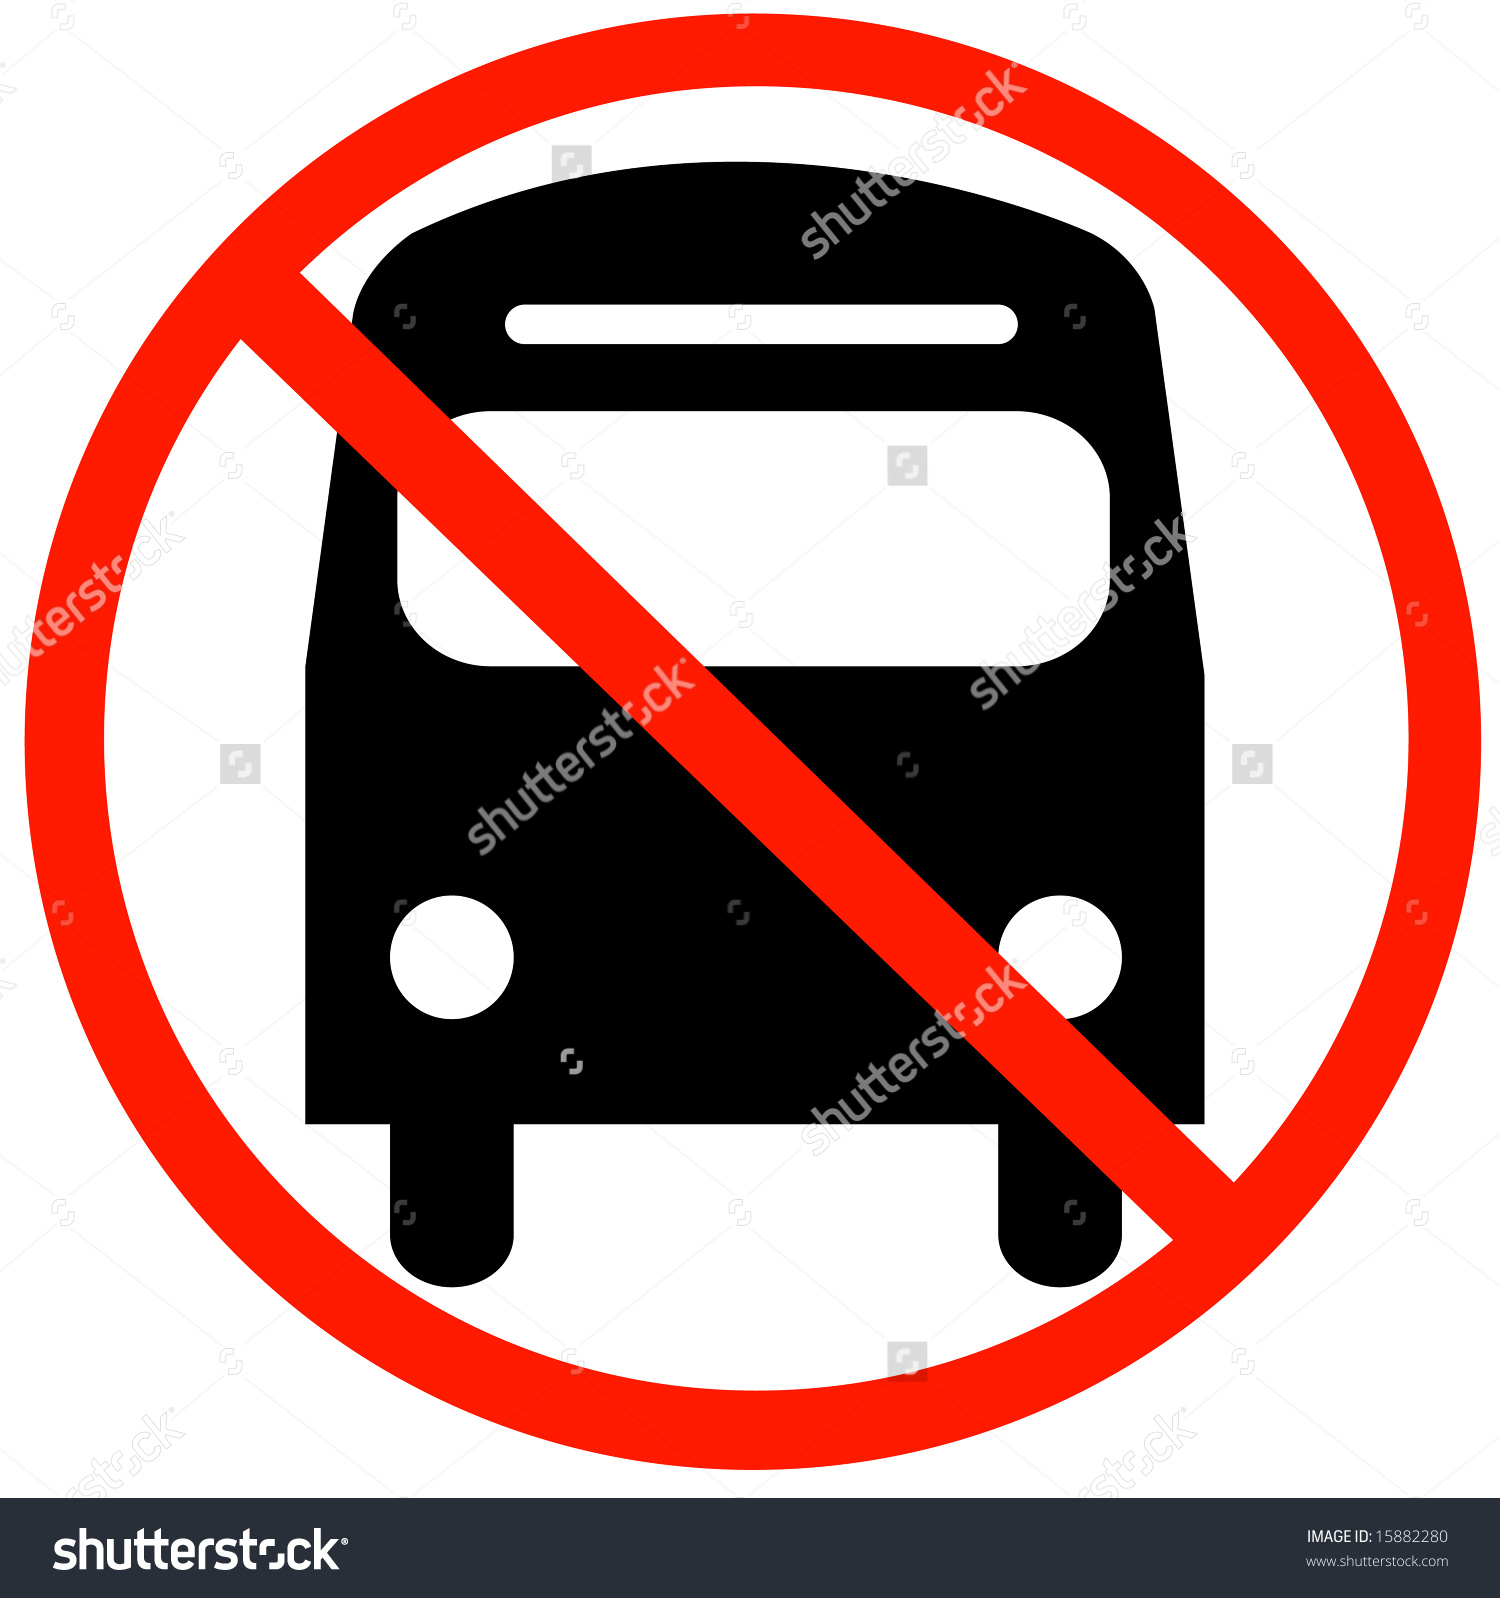 Bus With Not Allowed Symbol.